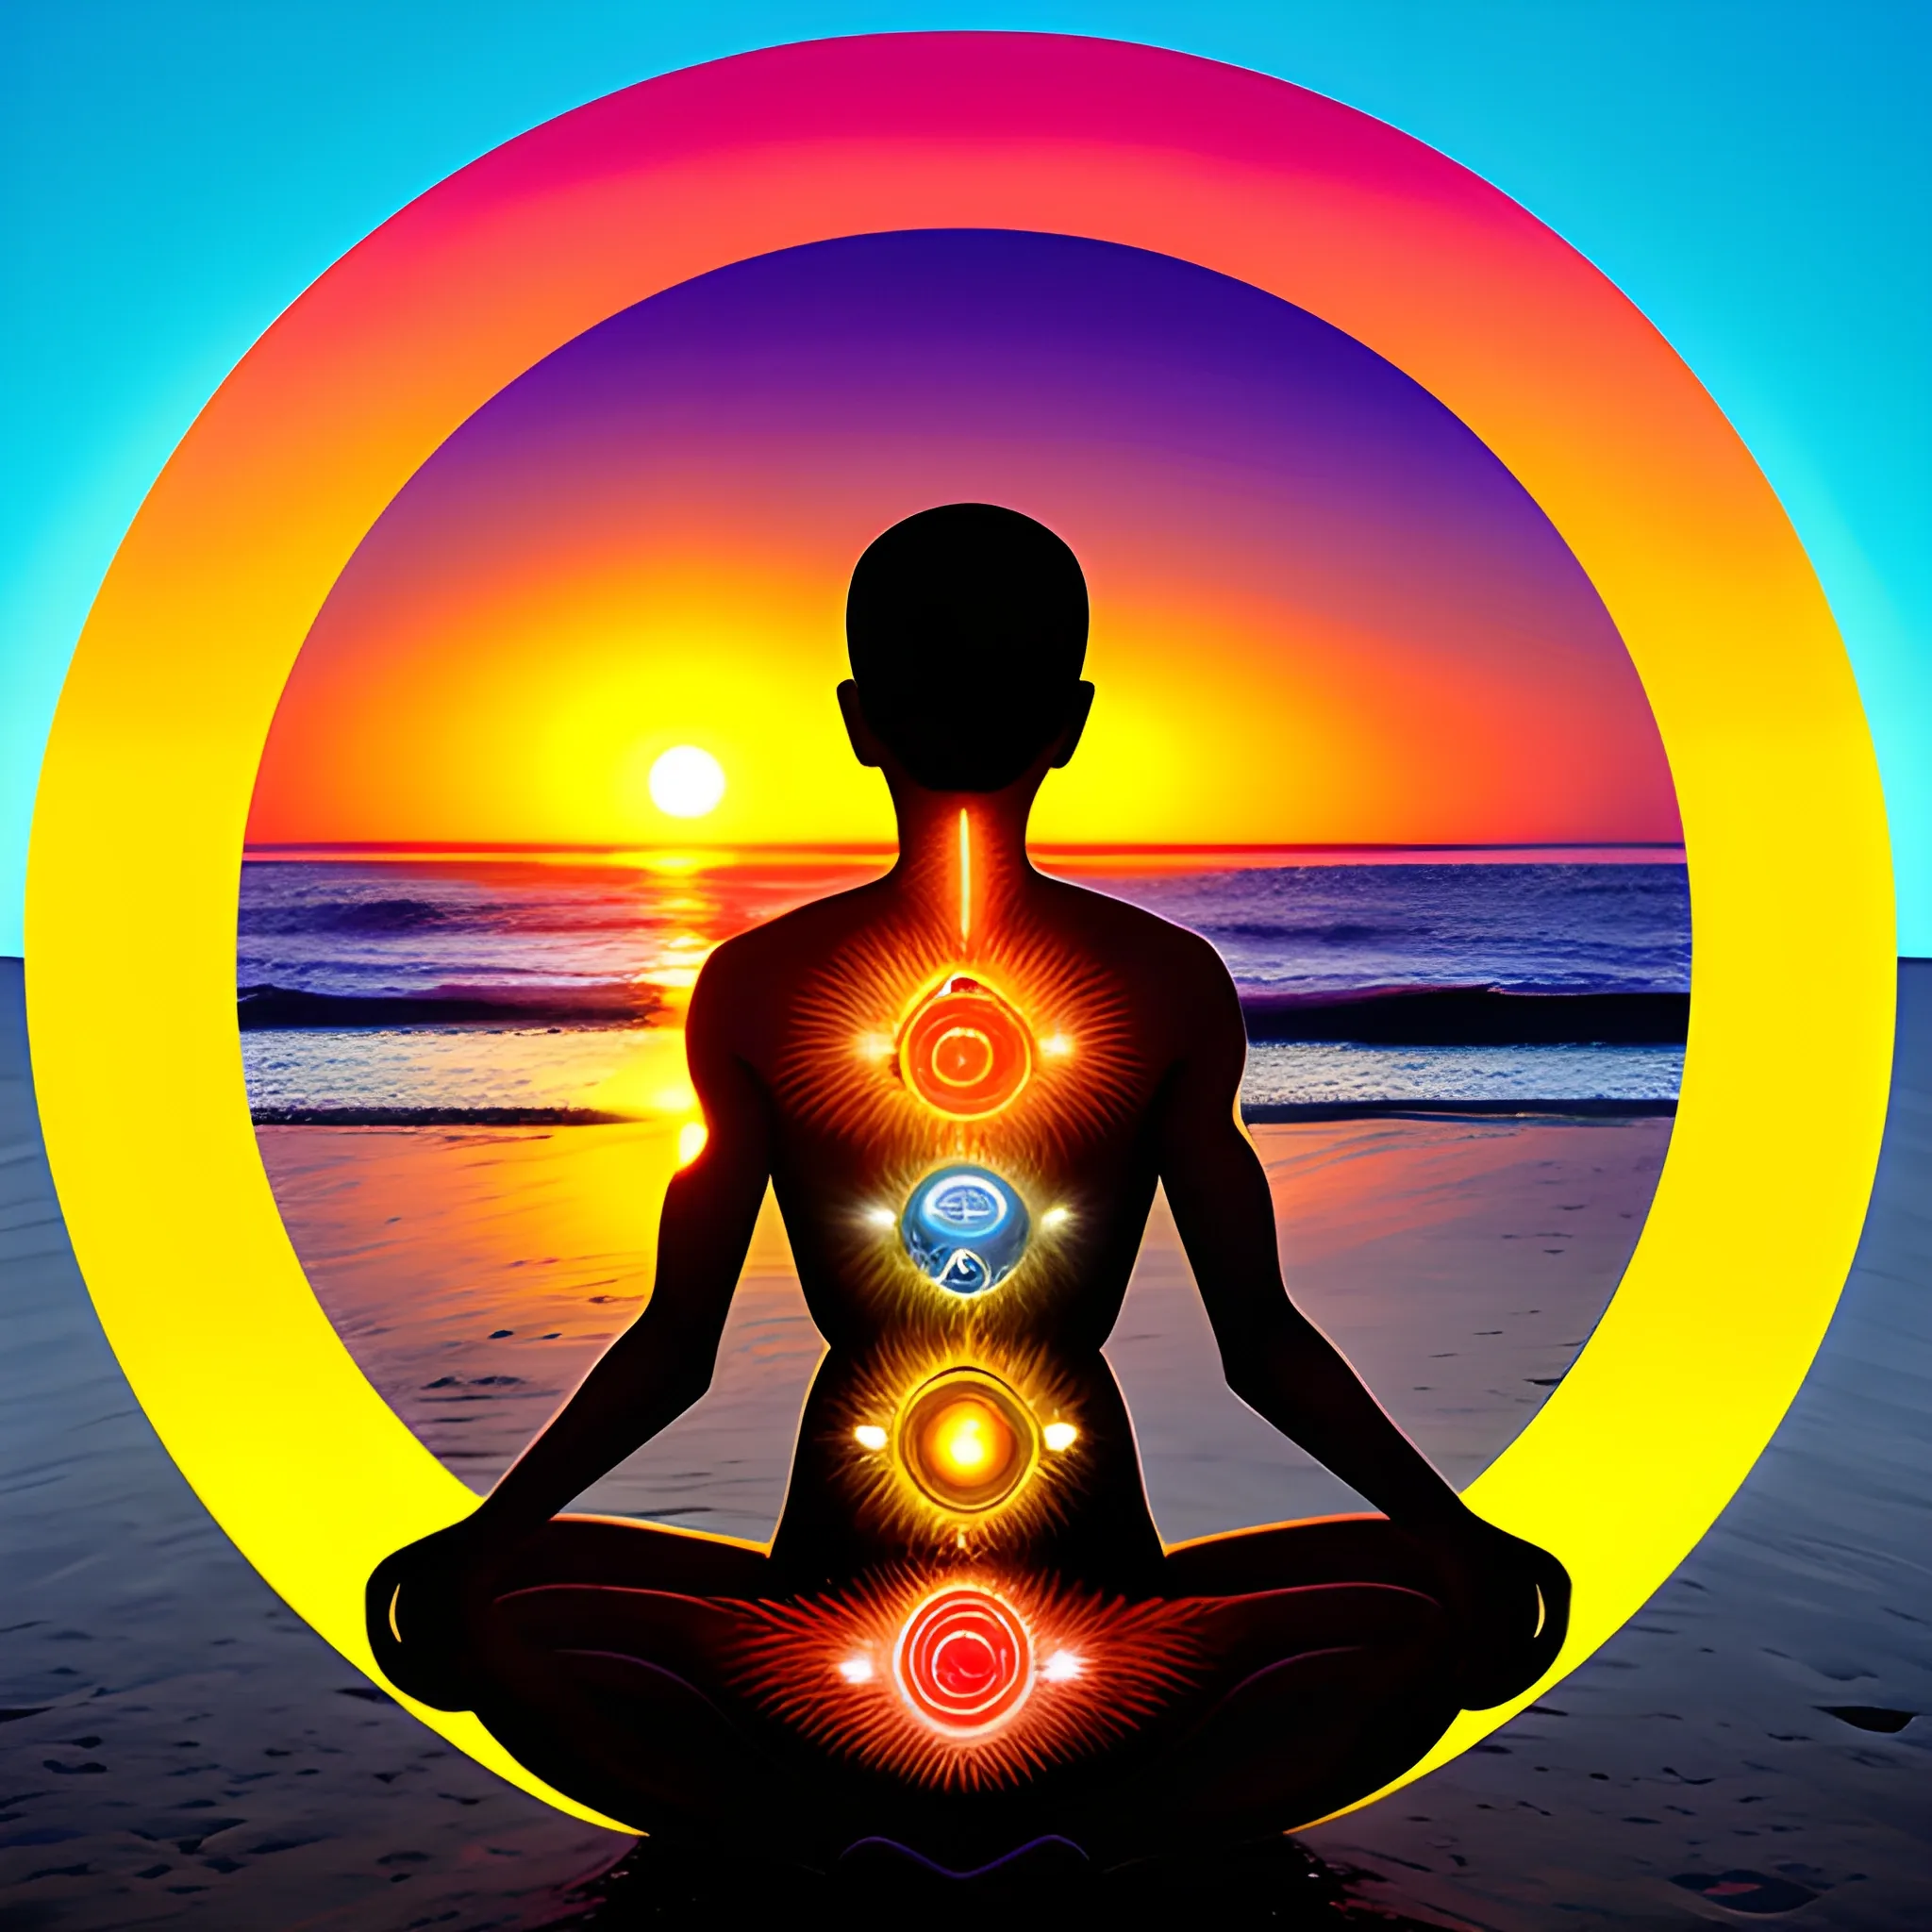 human being with the seven chakras, beach, sunset
